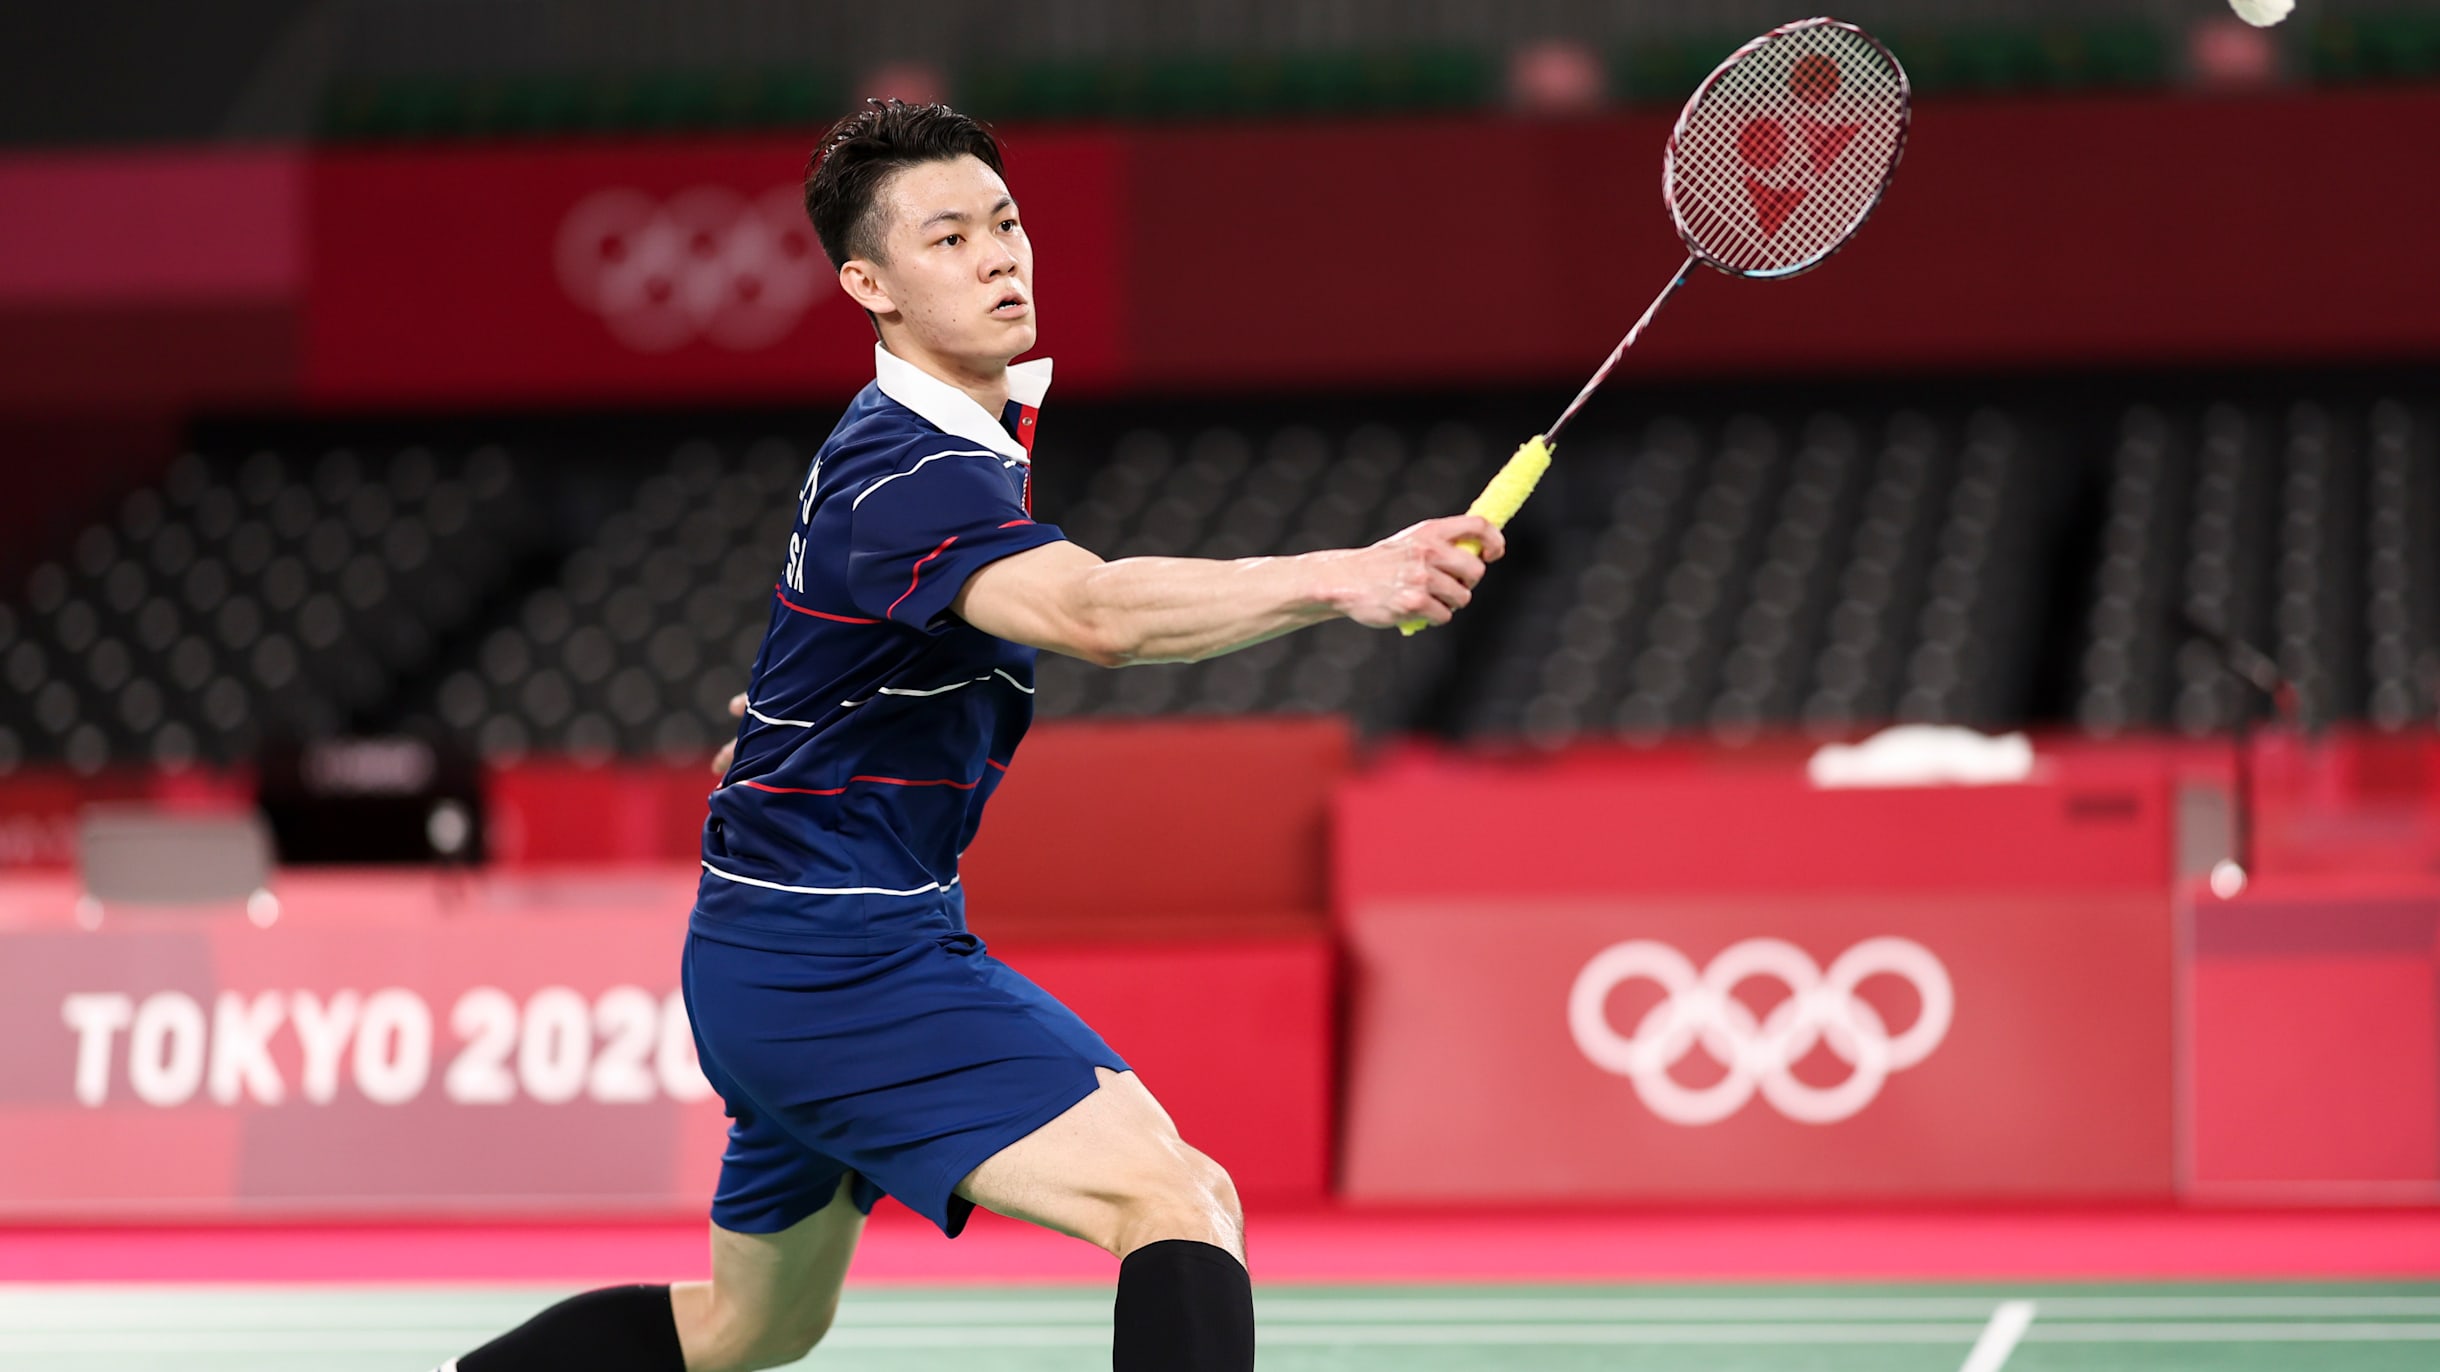 Badminton World Tour Finals 2021 Preview, schedule, and watch live streaming and telecast in Malaysia